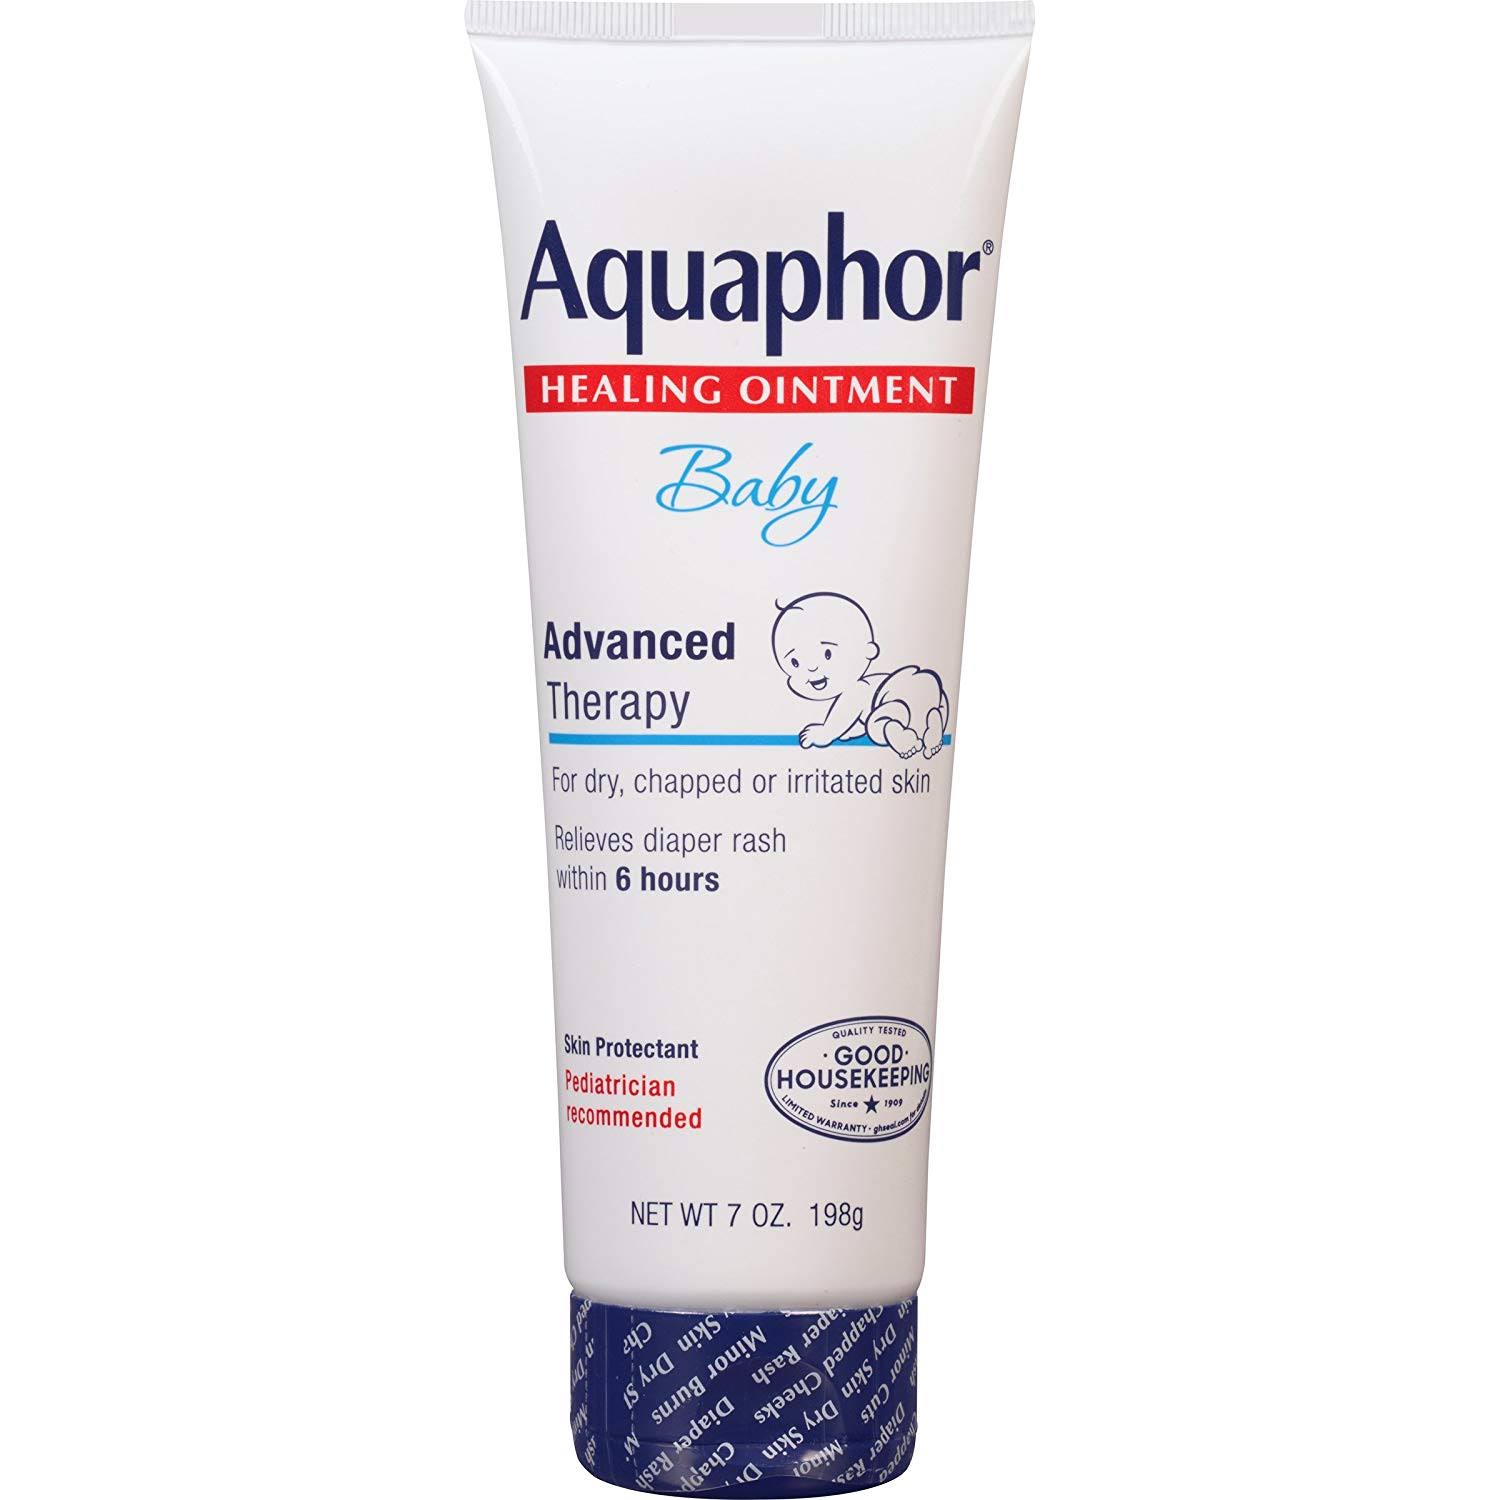 Aquaphor Baby Advanced Therapy Healing Ointment Skin Protectant - 7oz